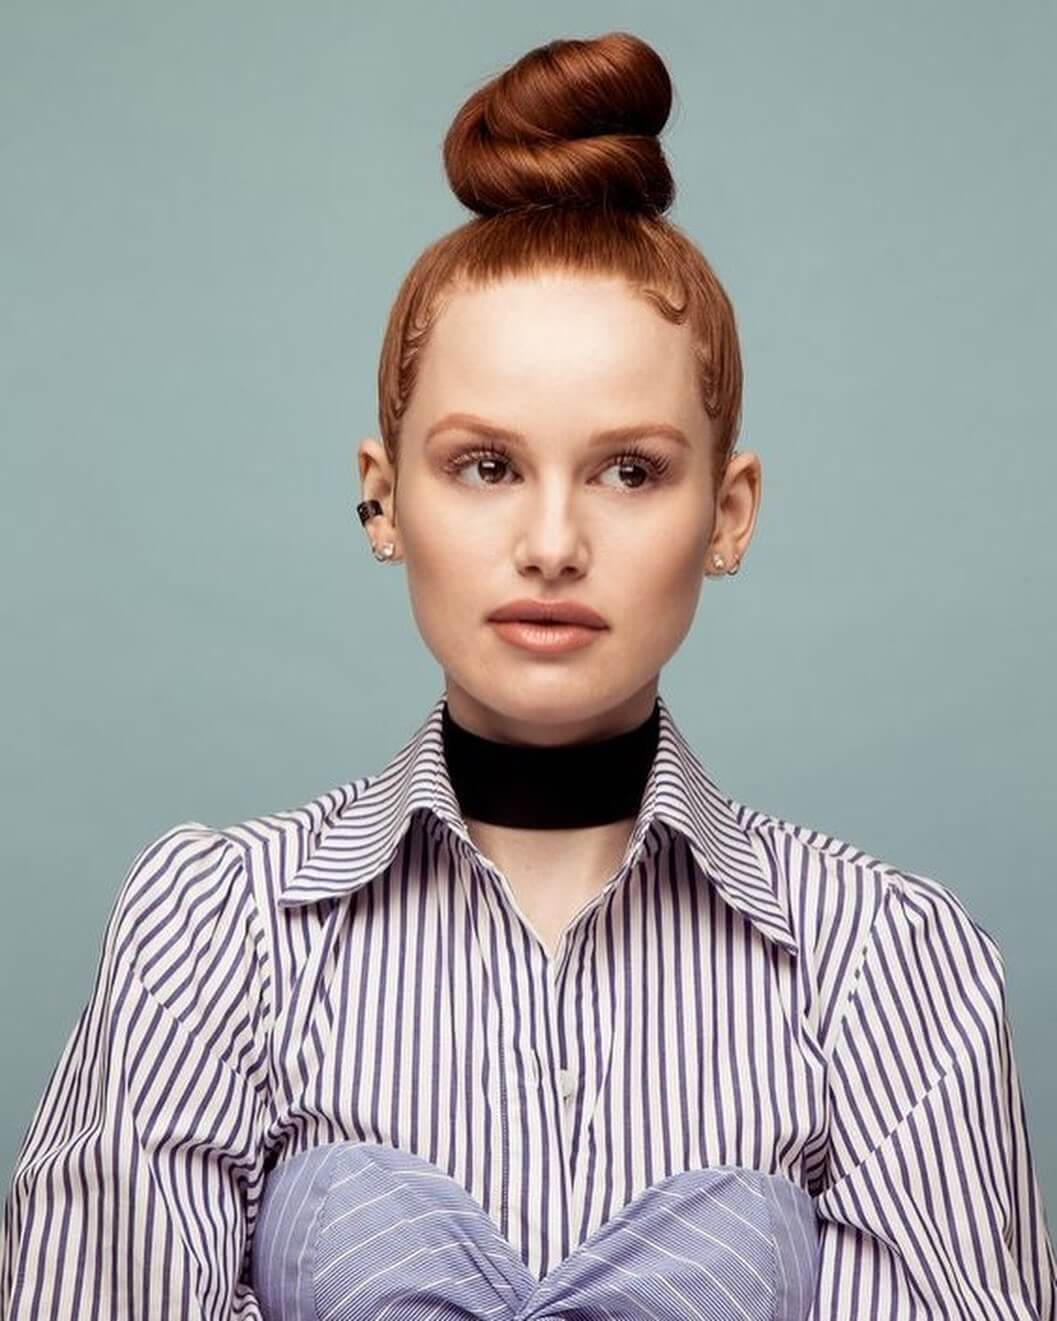 Top Knot Formal Hairstyle for Job Interviews